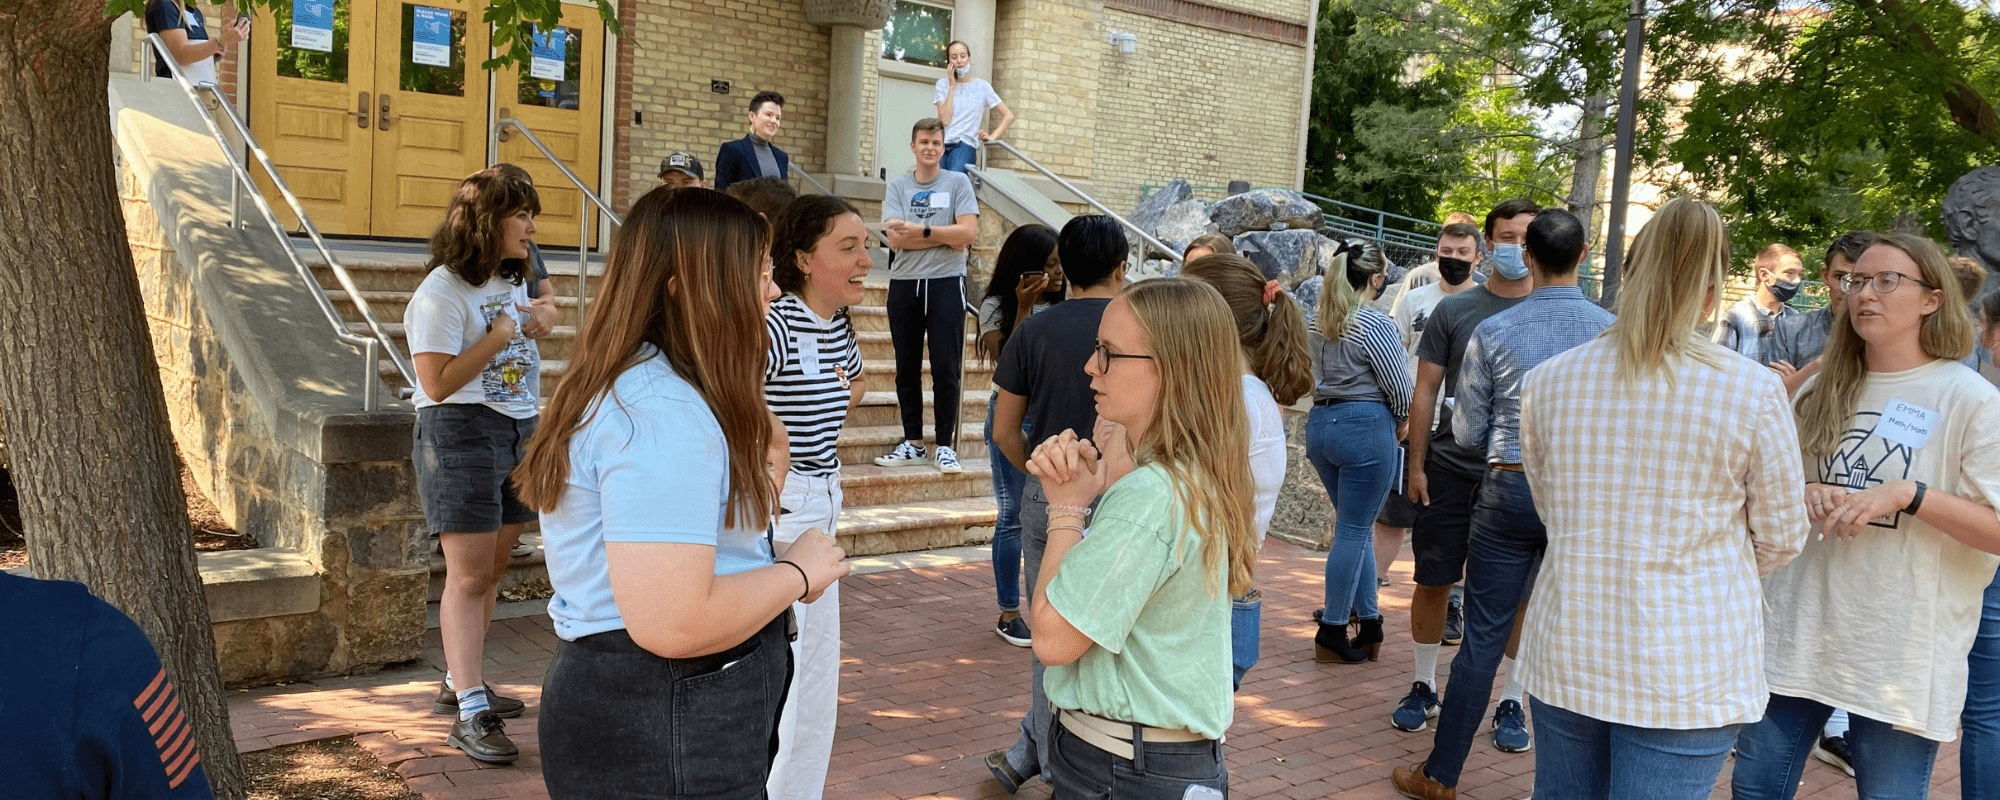 CAI students talk with each other during a class break on the USU campus.